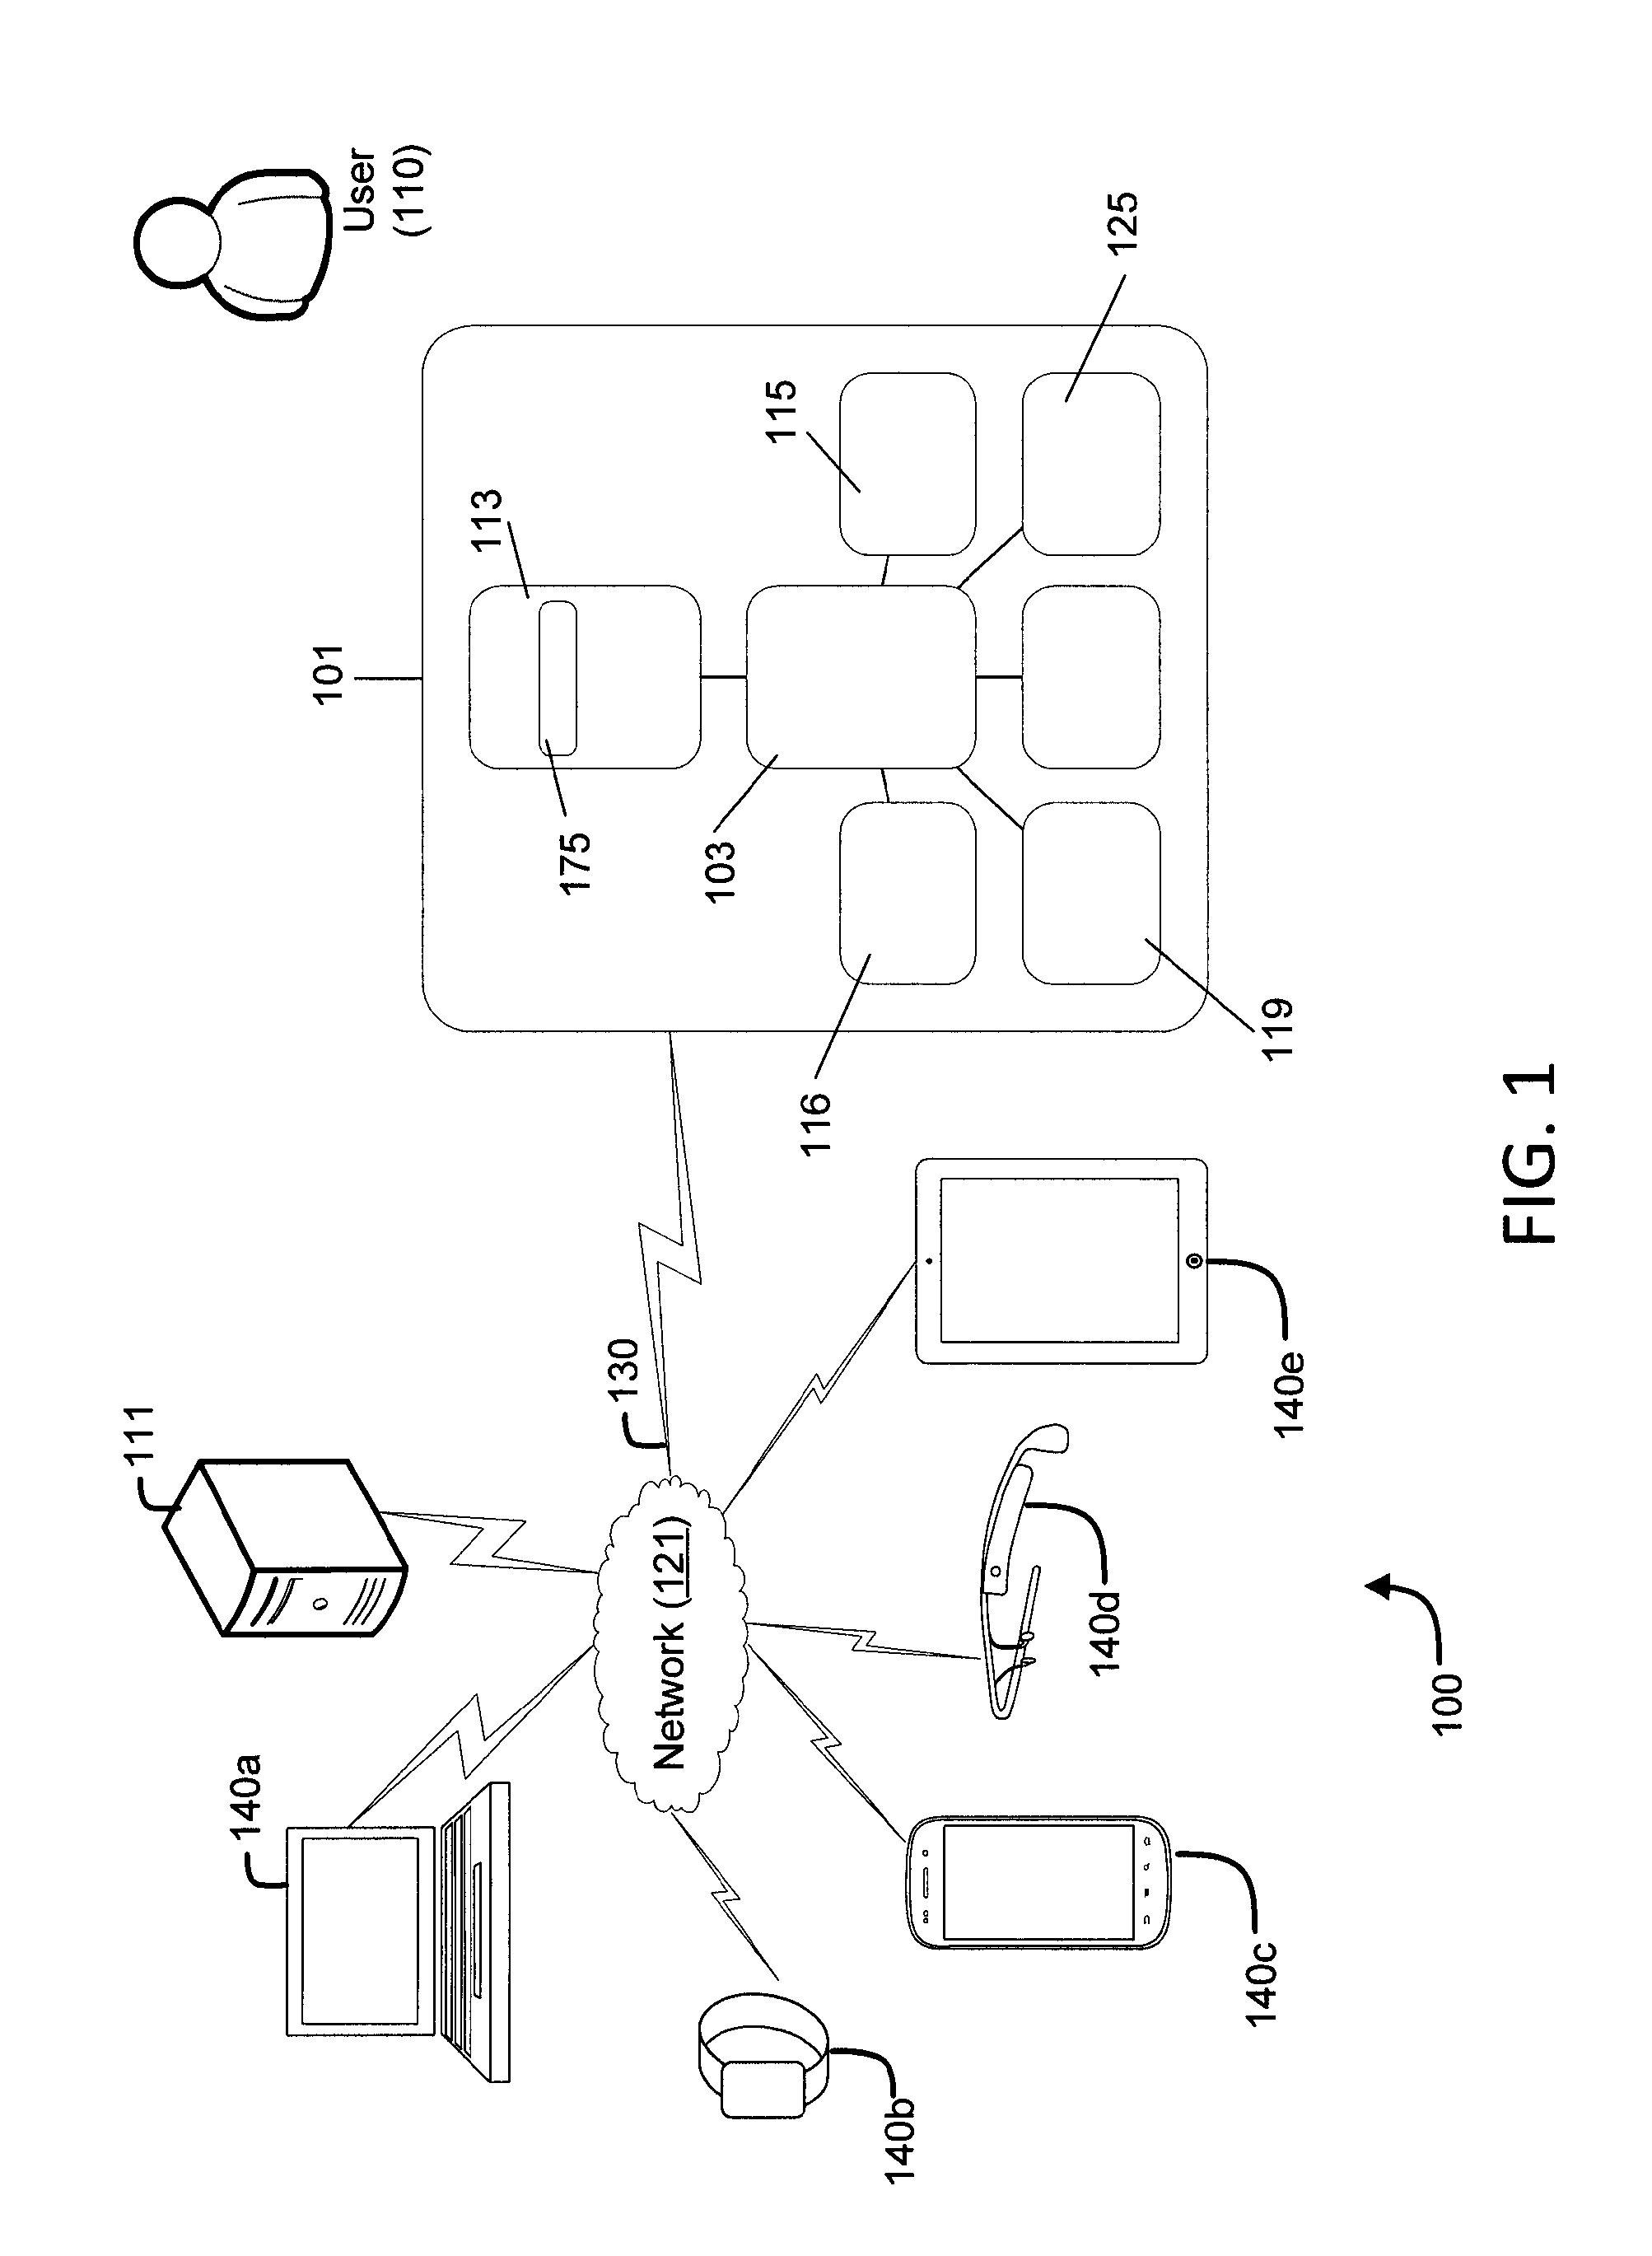 System and method for changing security behavior of a device based on proximity to another device